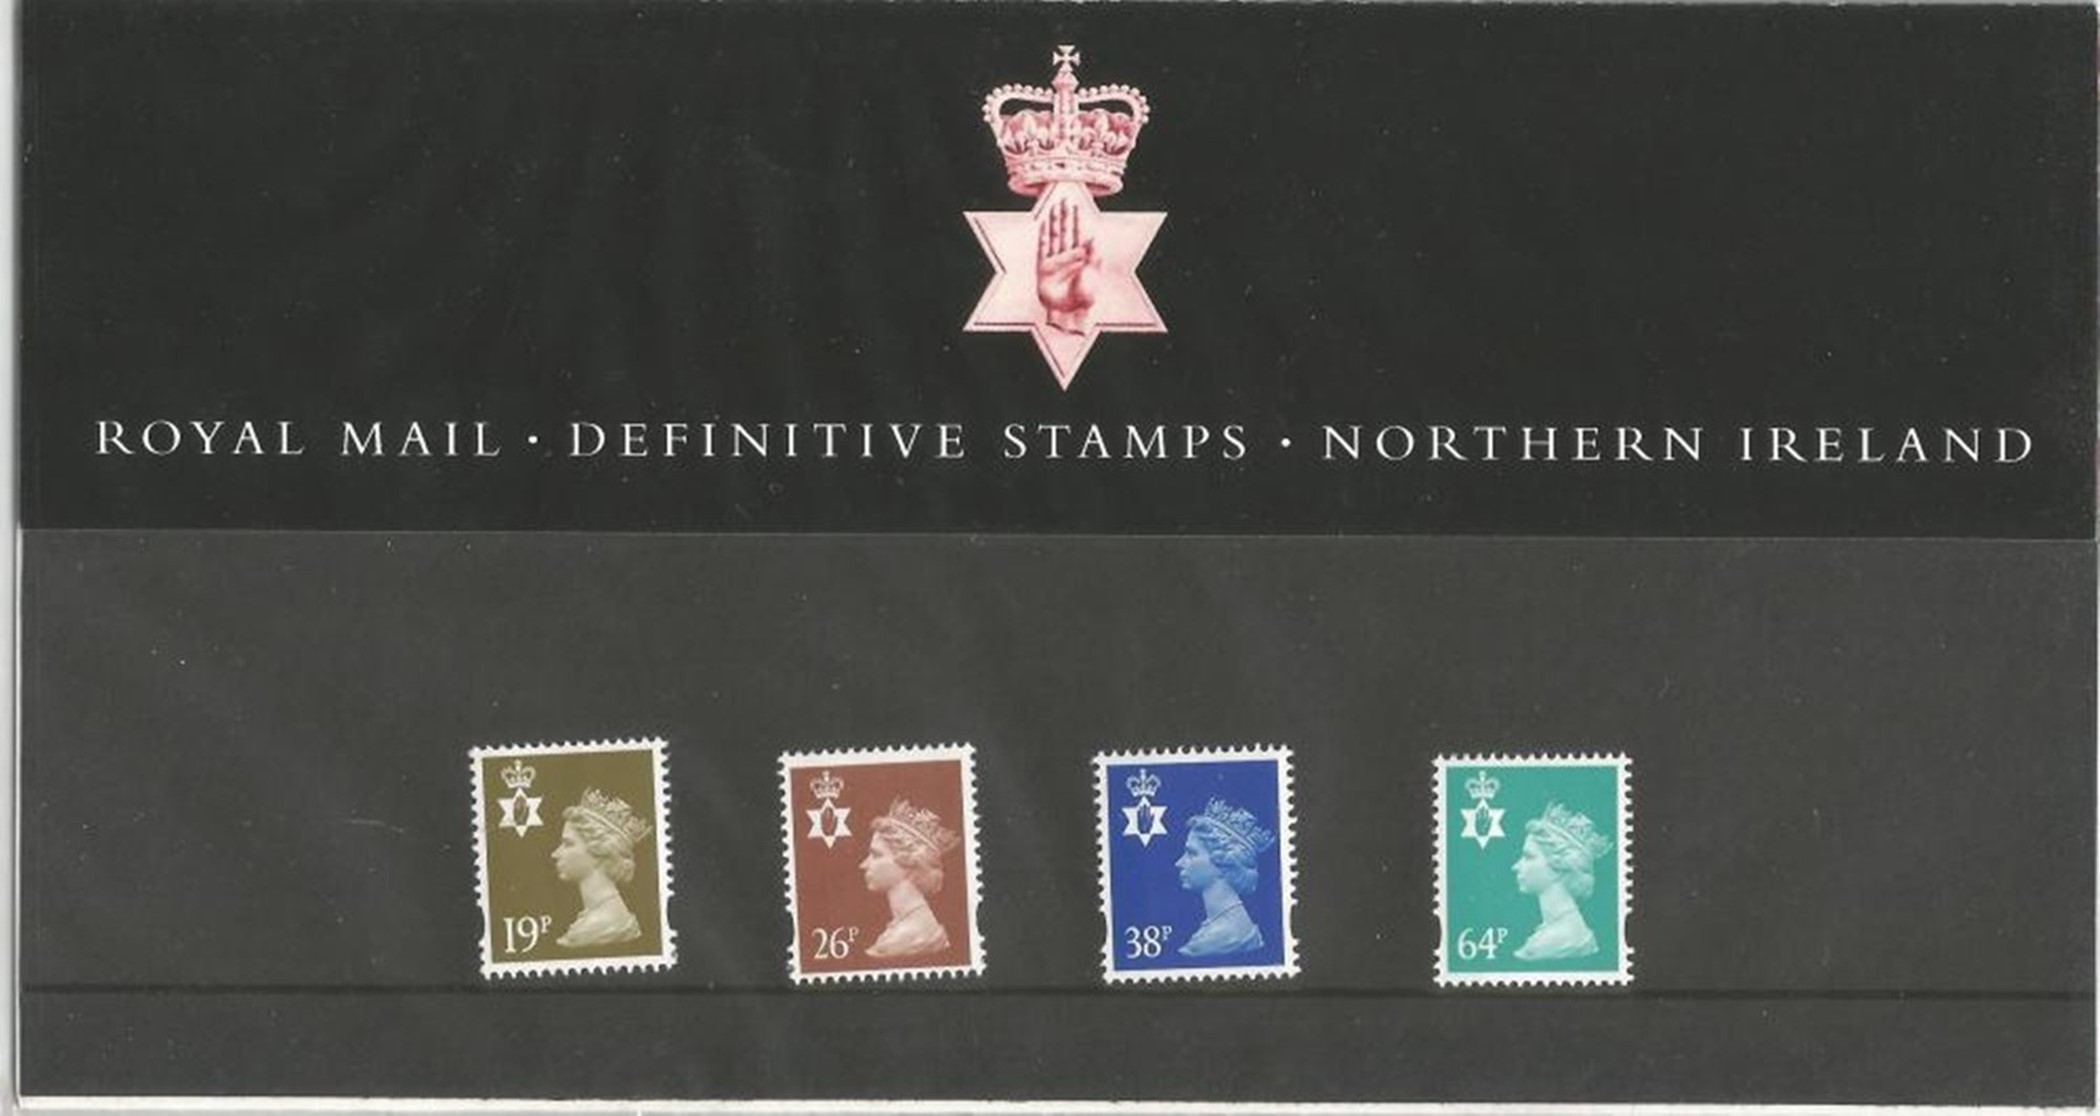 GB Mint Stamps Presentation Pack no 47 Royal Mail Definitive Stamps Northern Ireland 1999. Good